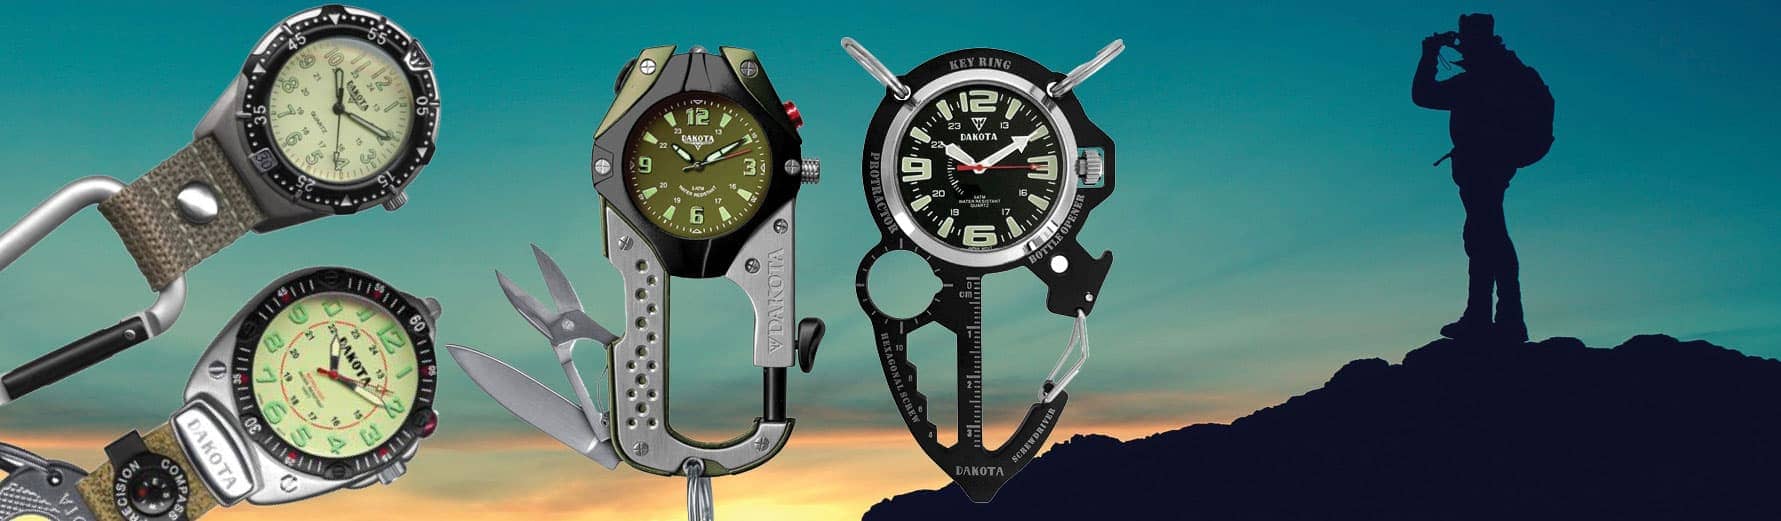 Military, Tactical Watches for Adventure & Outdoors